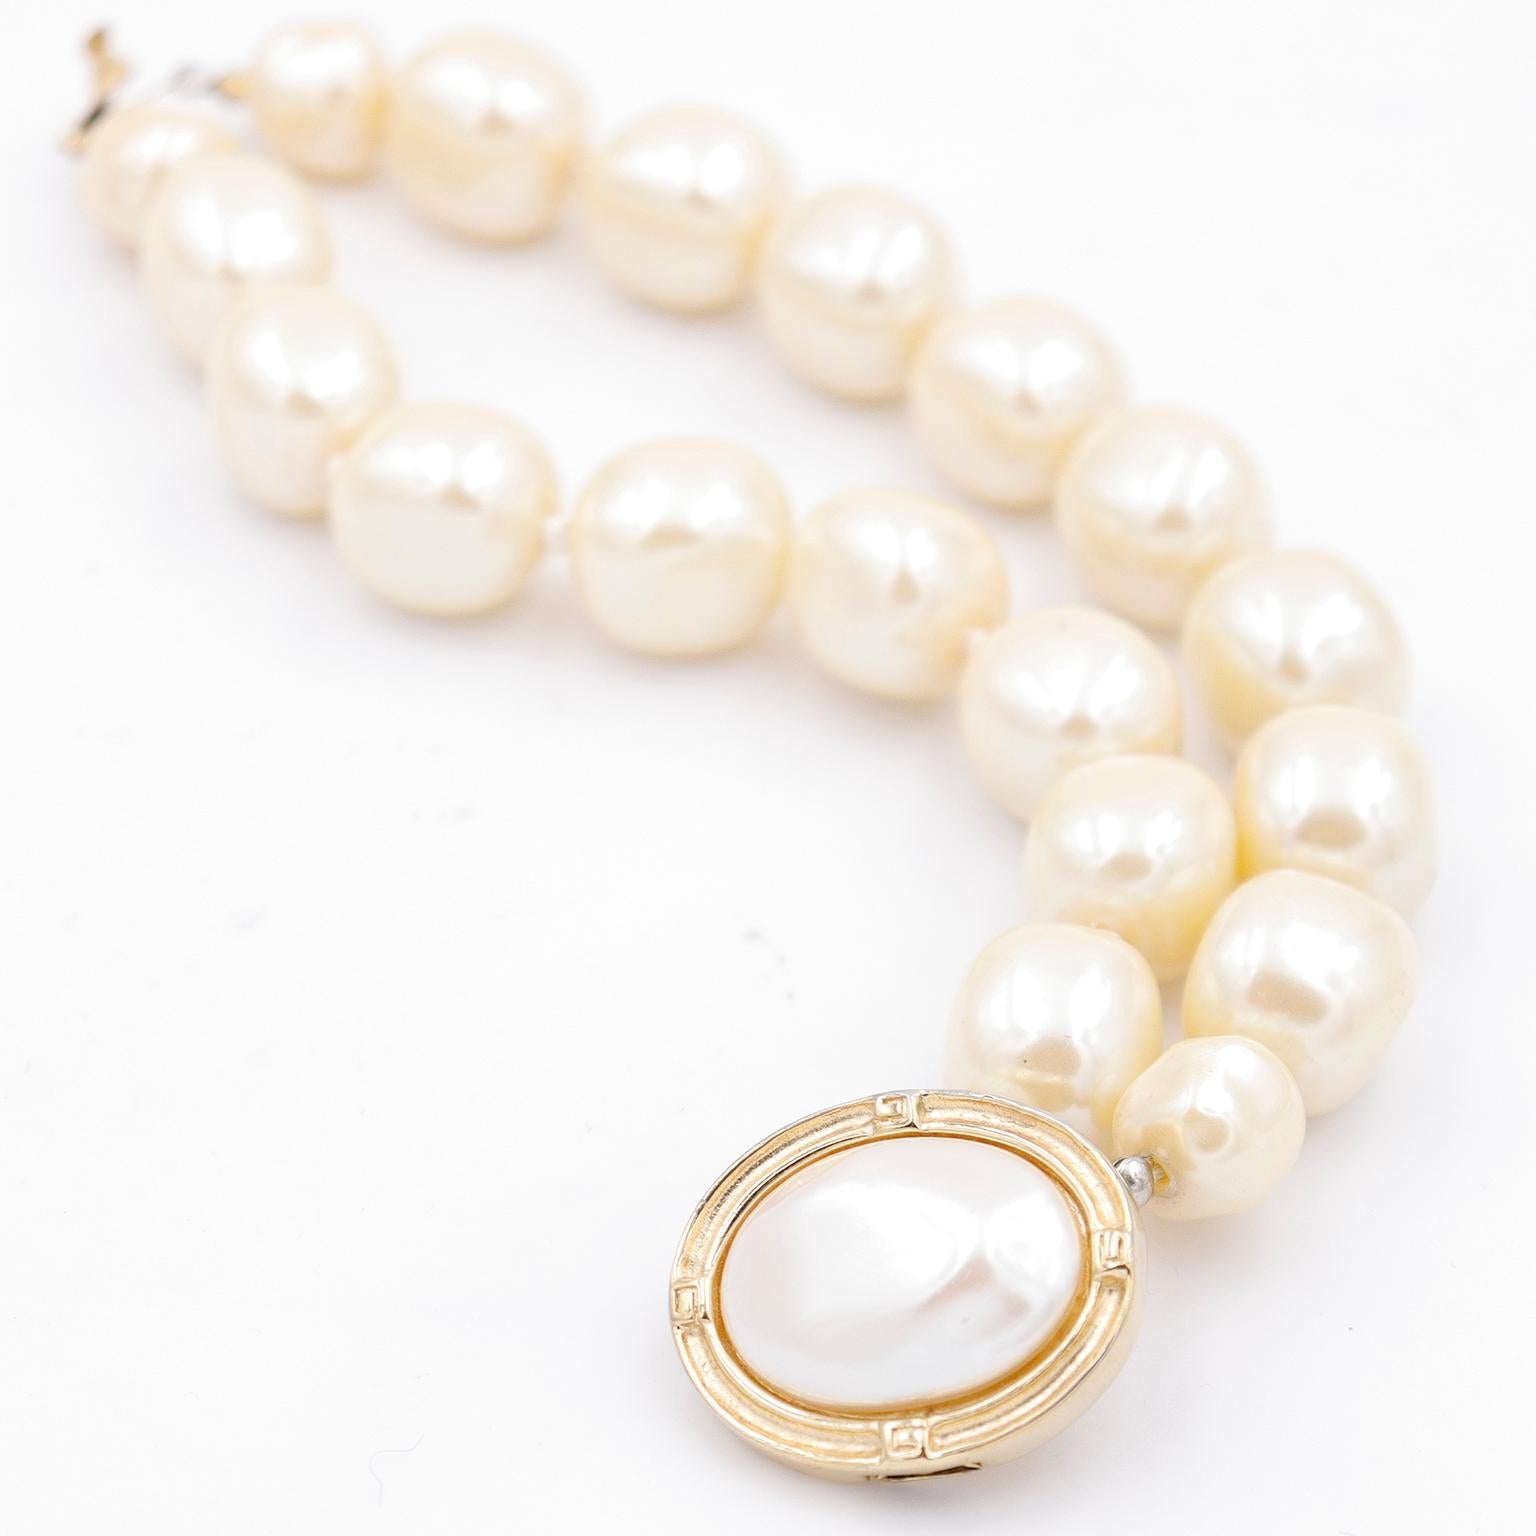 This vintage Givenchy baroque style faux pearl bracelet is such a great statement piece! This gorgeous bracelet features large irregular shaped faux pearls and a gold plated clasp with a center large oval pearl. The metal around the center is neatly